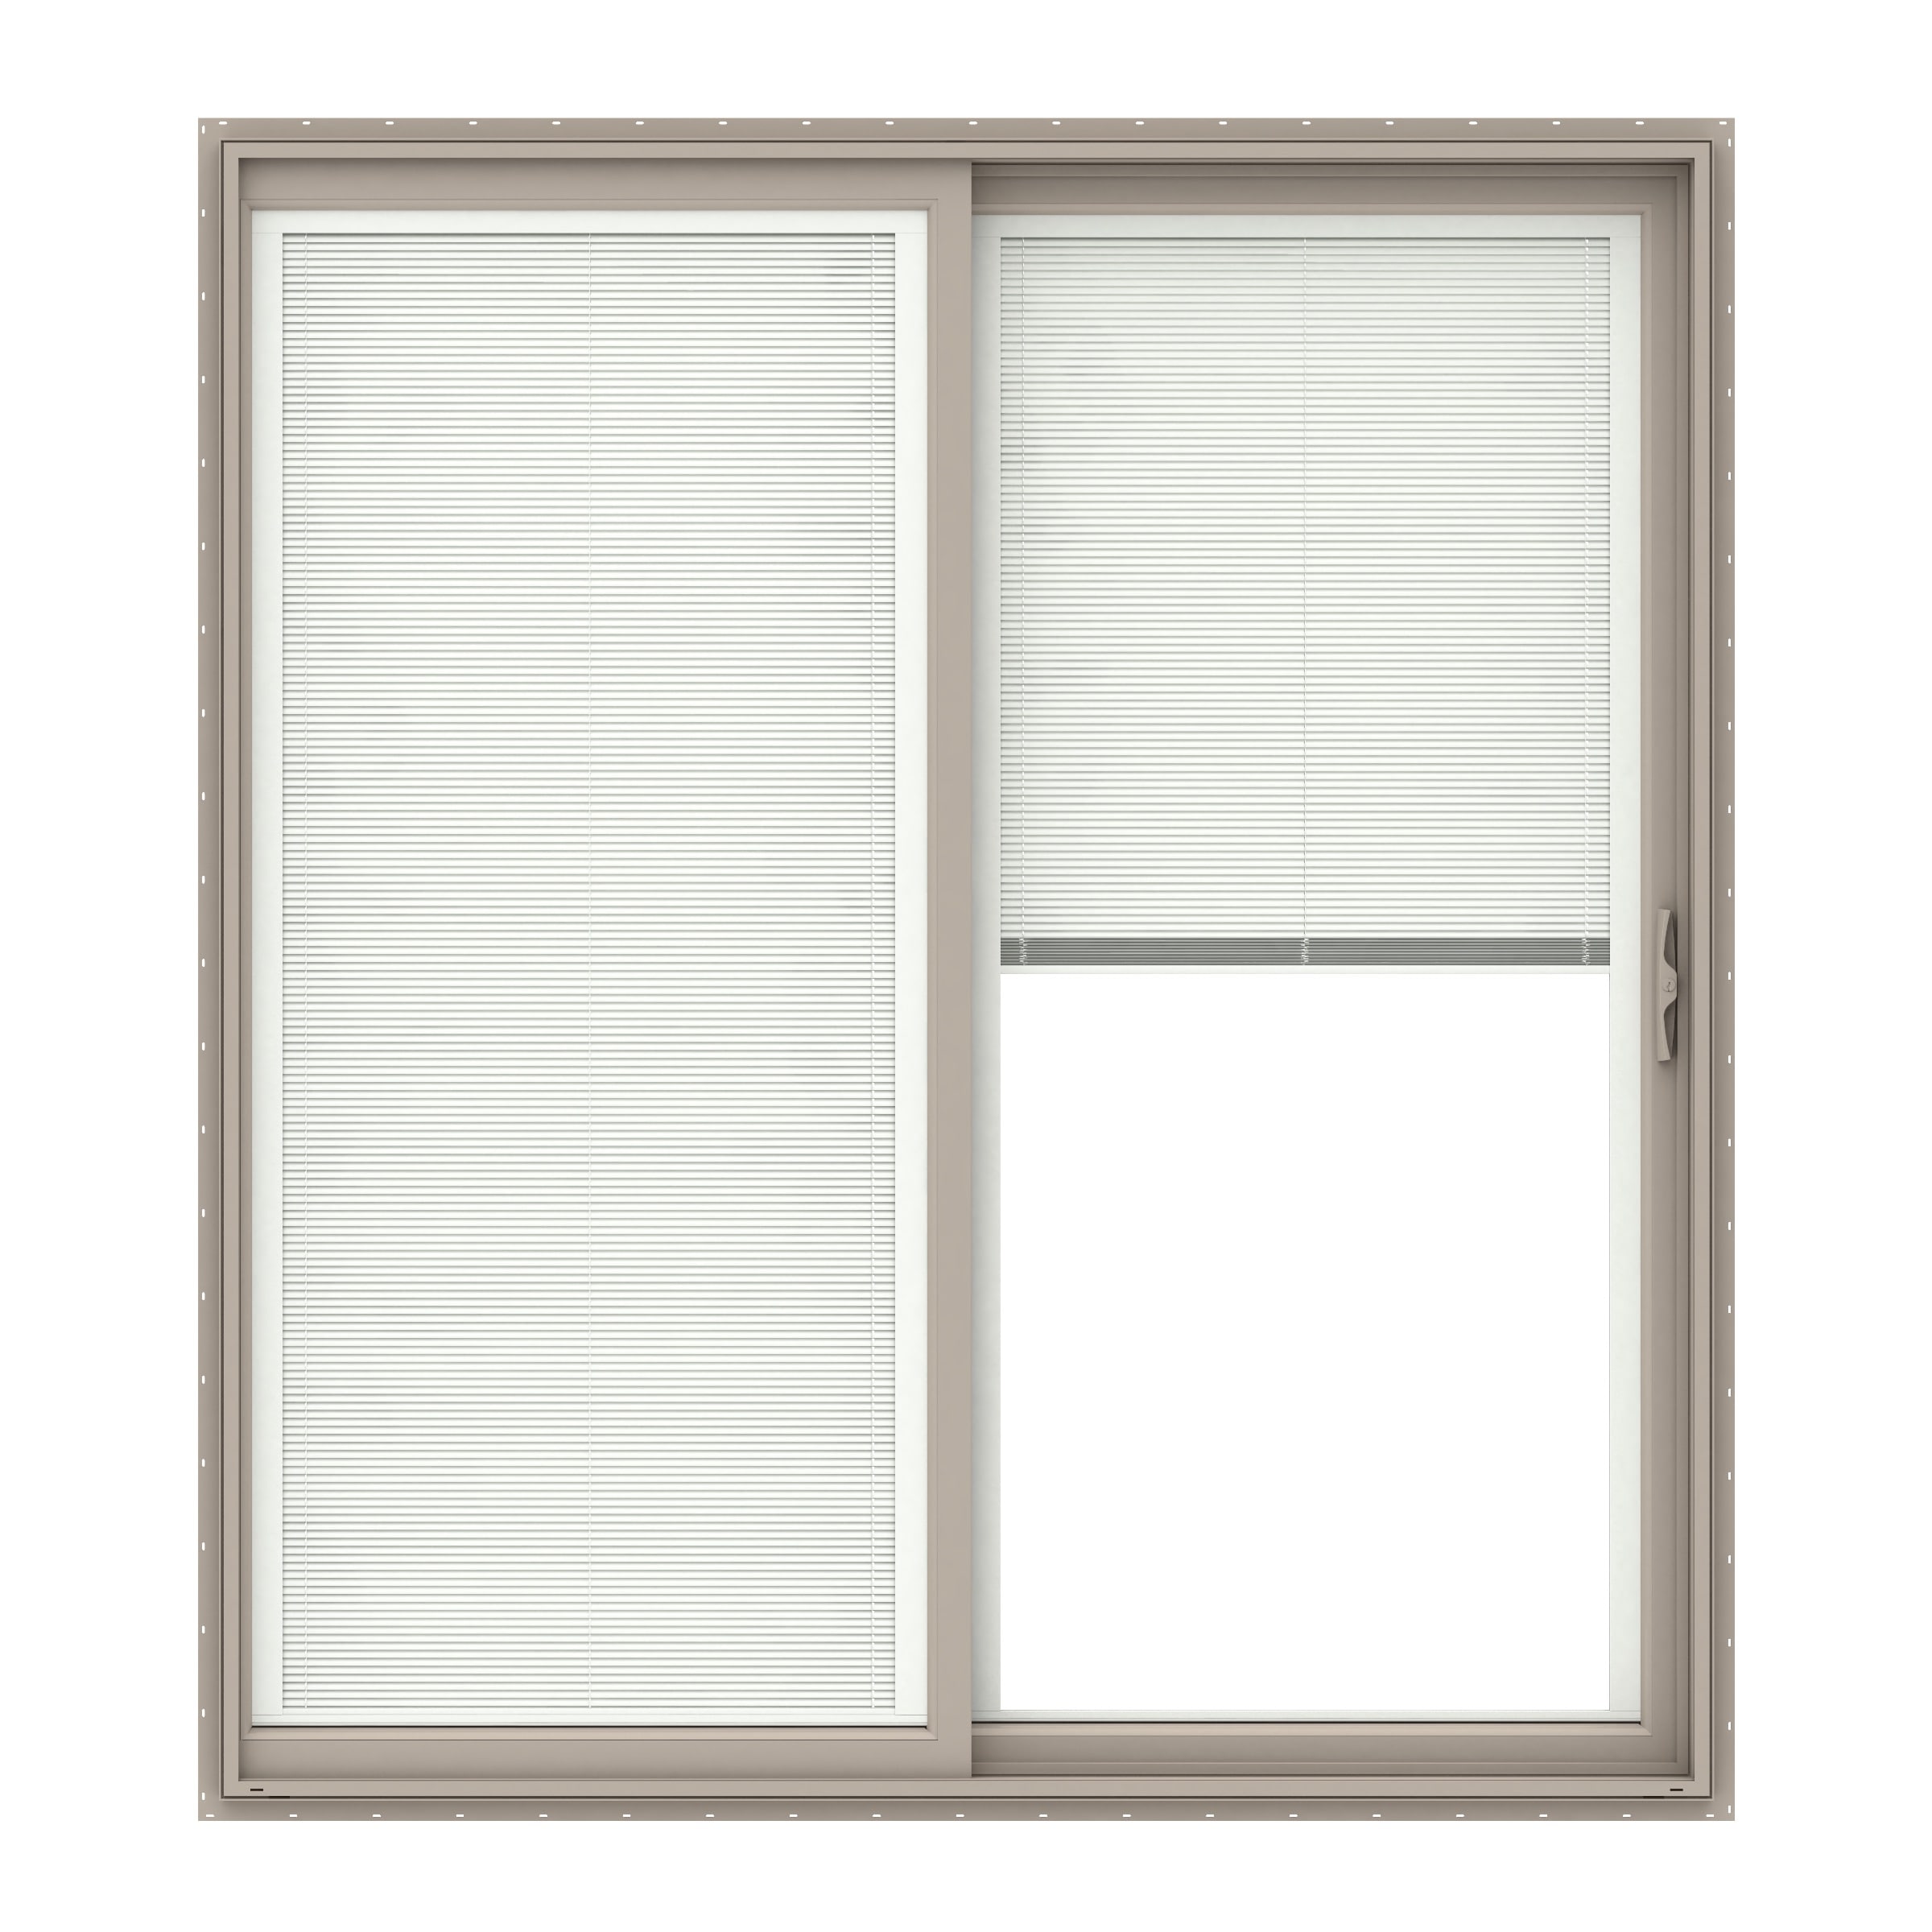 150 Series 72-in x 80-in Low-e Blinds Between The Glass Fossil Vinyl Sliding Right-Hand Sliding Double Patio Door in Brown | - Pella 1000010532